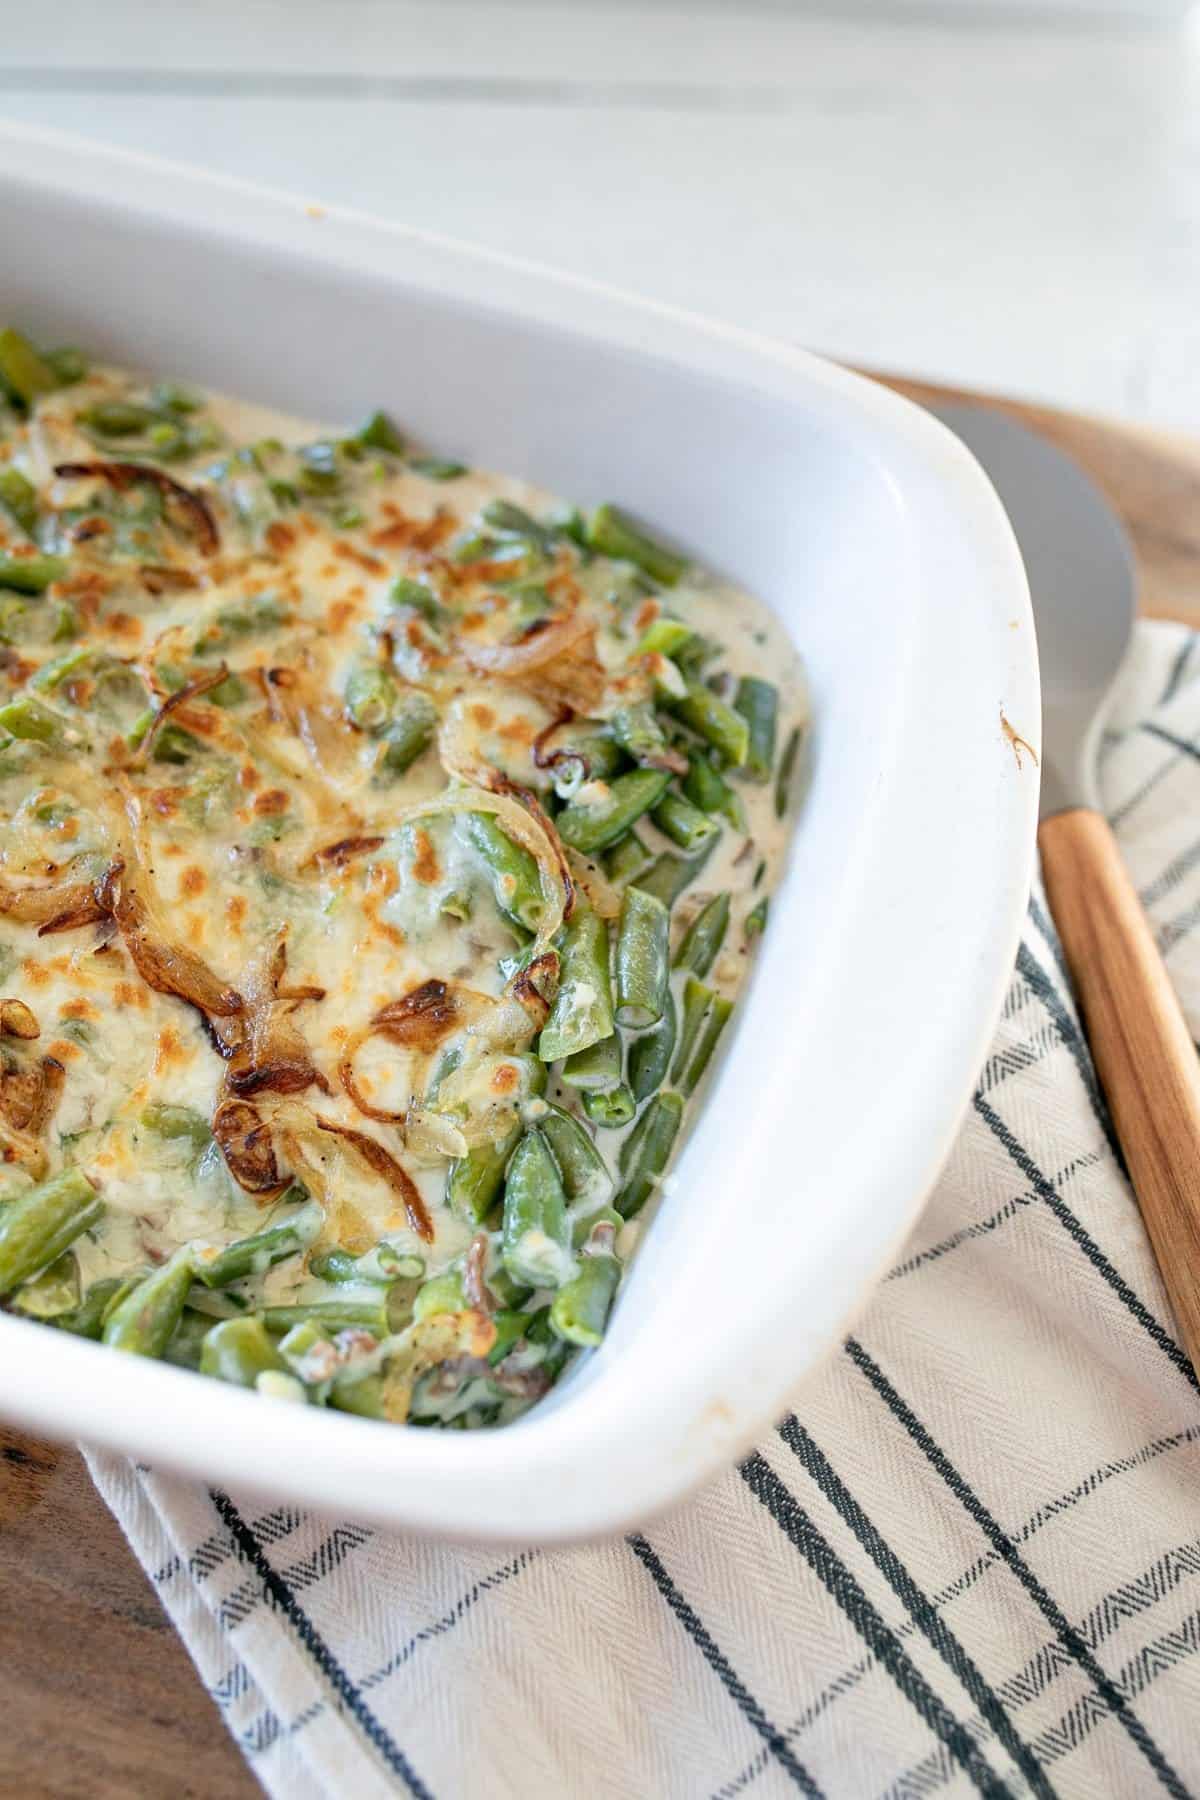 10 Best Ways To Use Leftover Green Bean Casserole